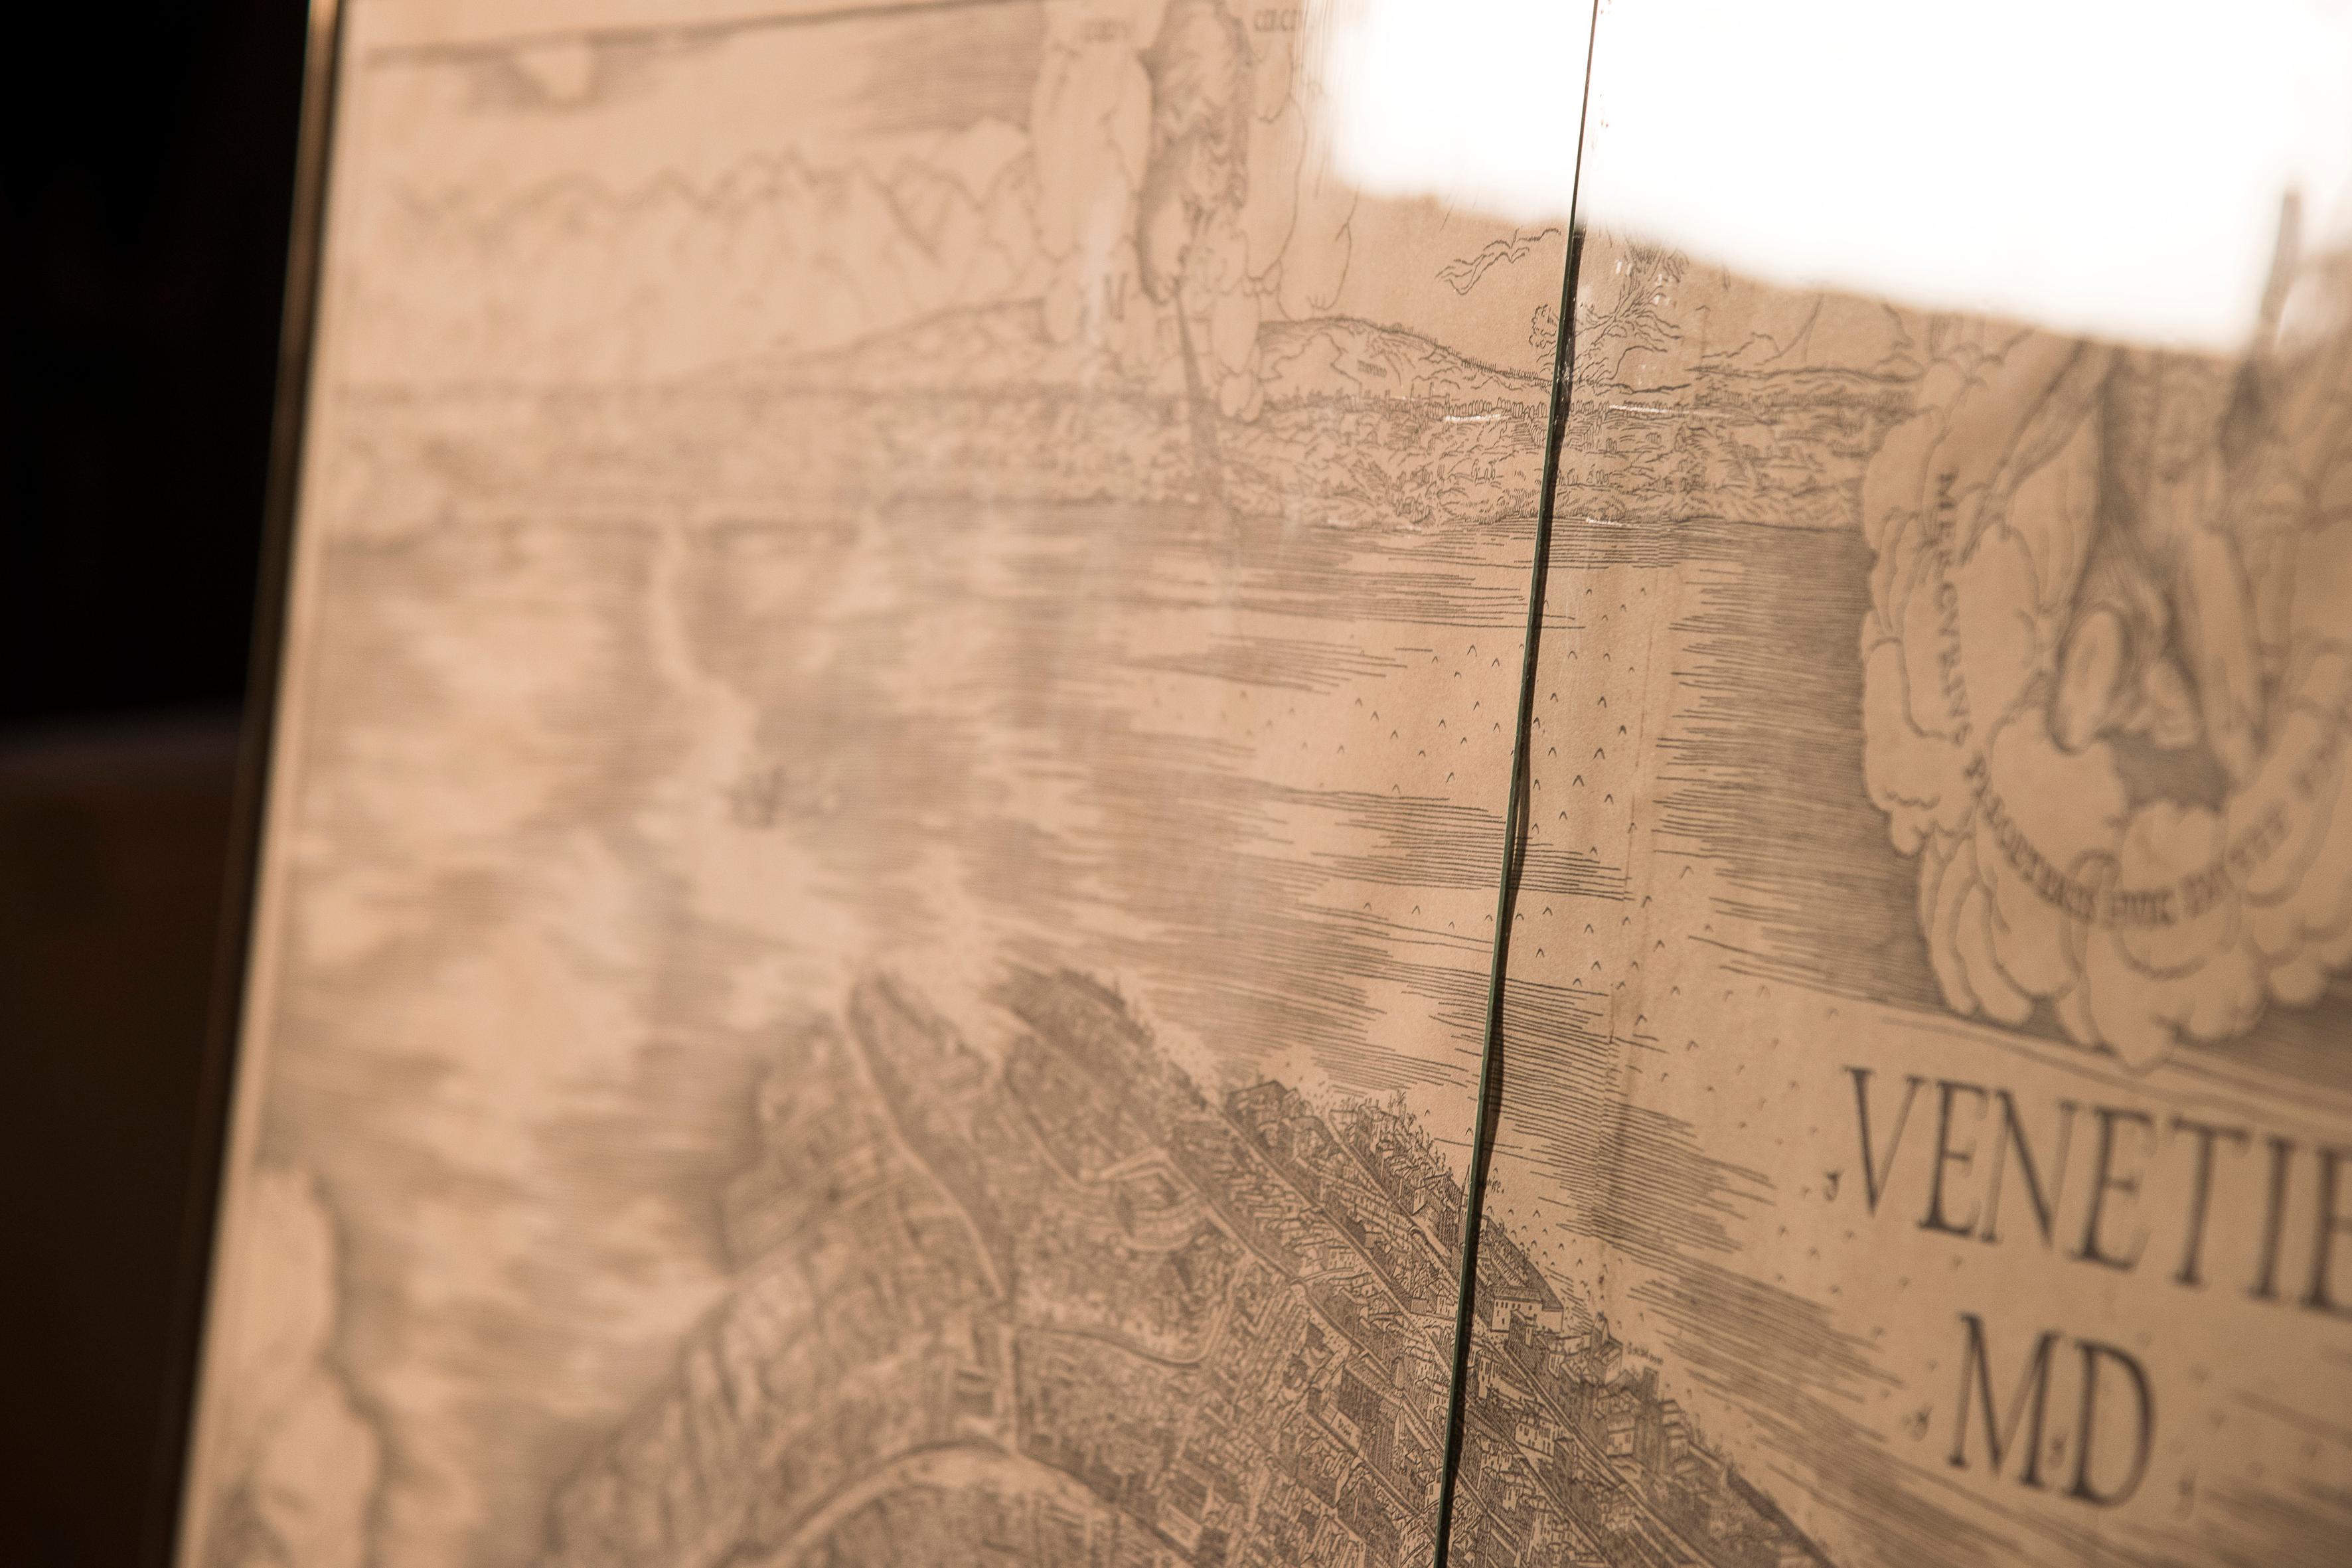 Huge Mid 19th century Six Panels Venice Map Engraving For Sale 2